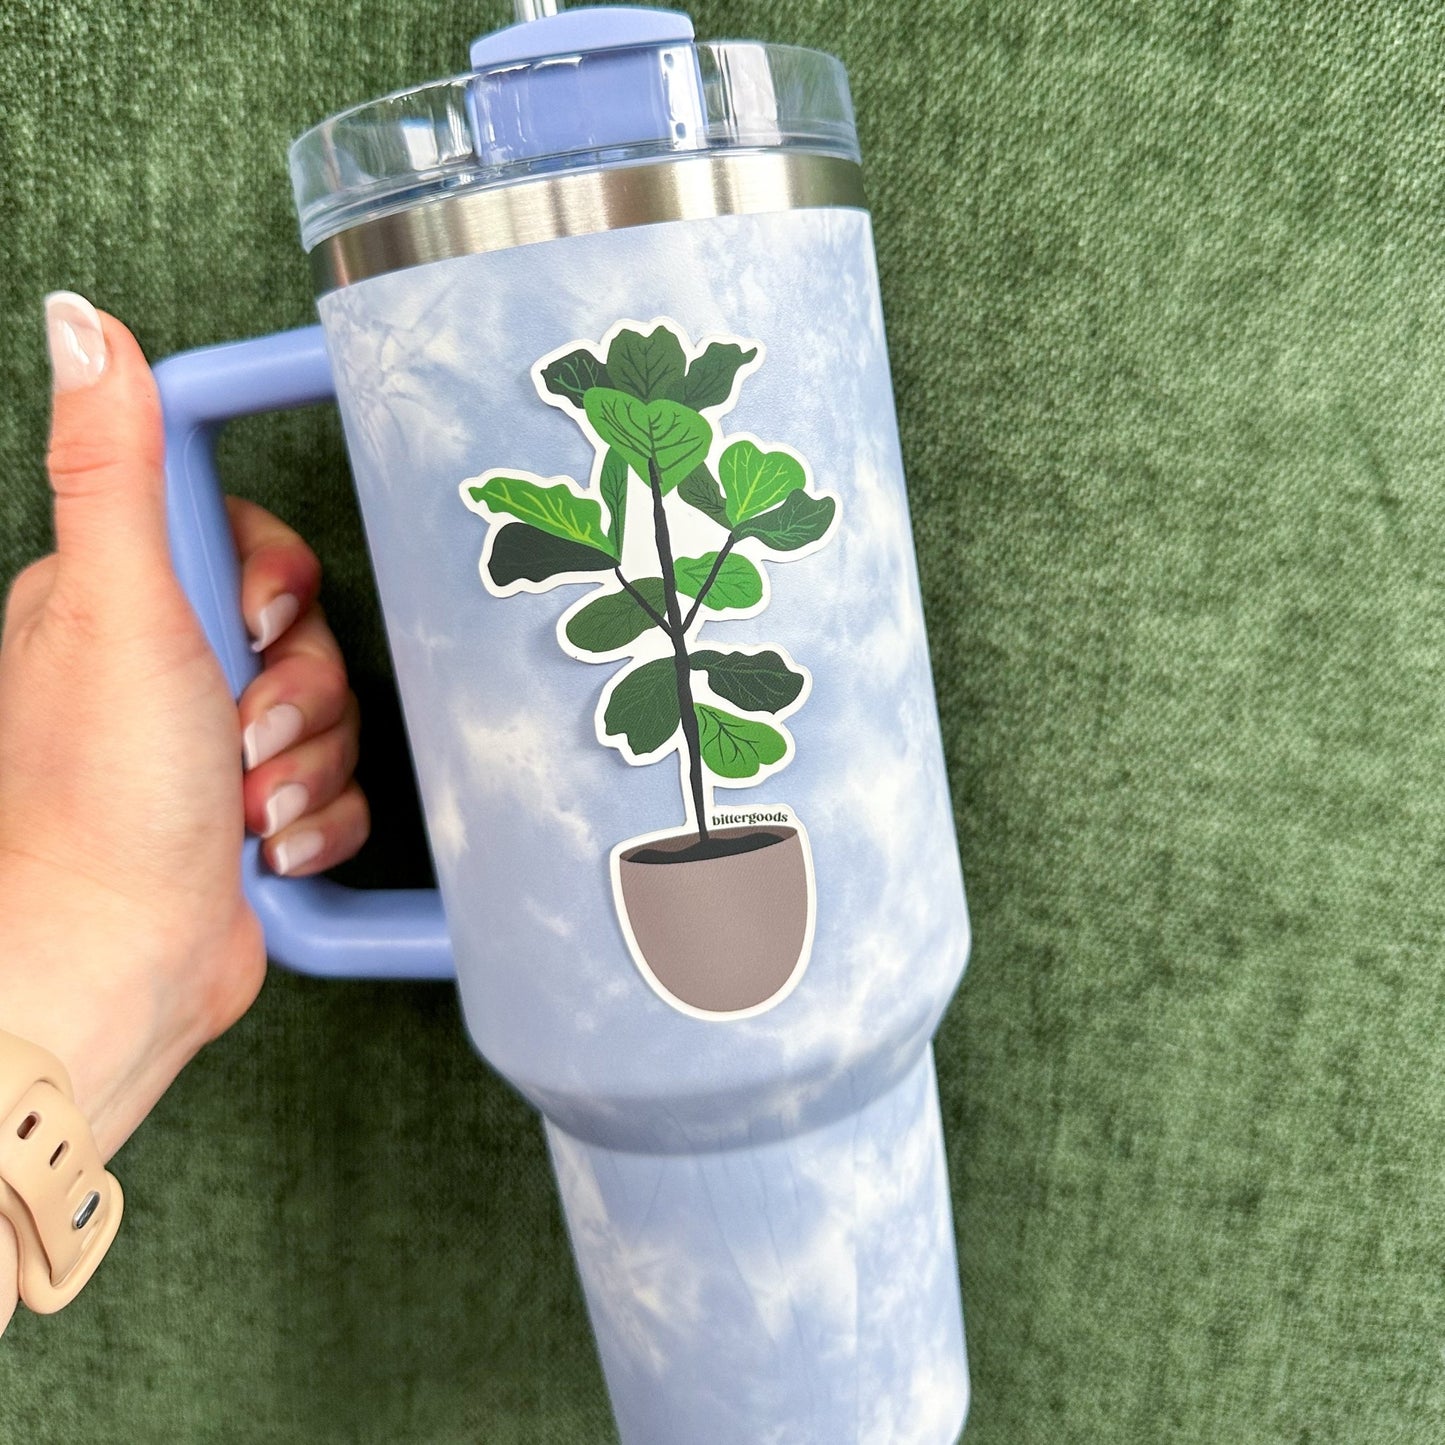 Fiddle leaf fig plant sticker on a Stanley water bottle held by a manicured hand on green background